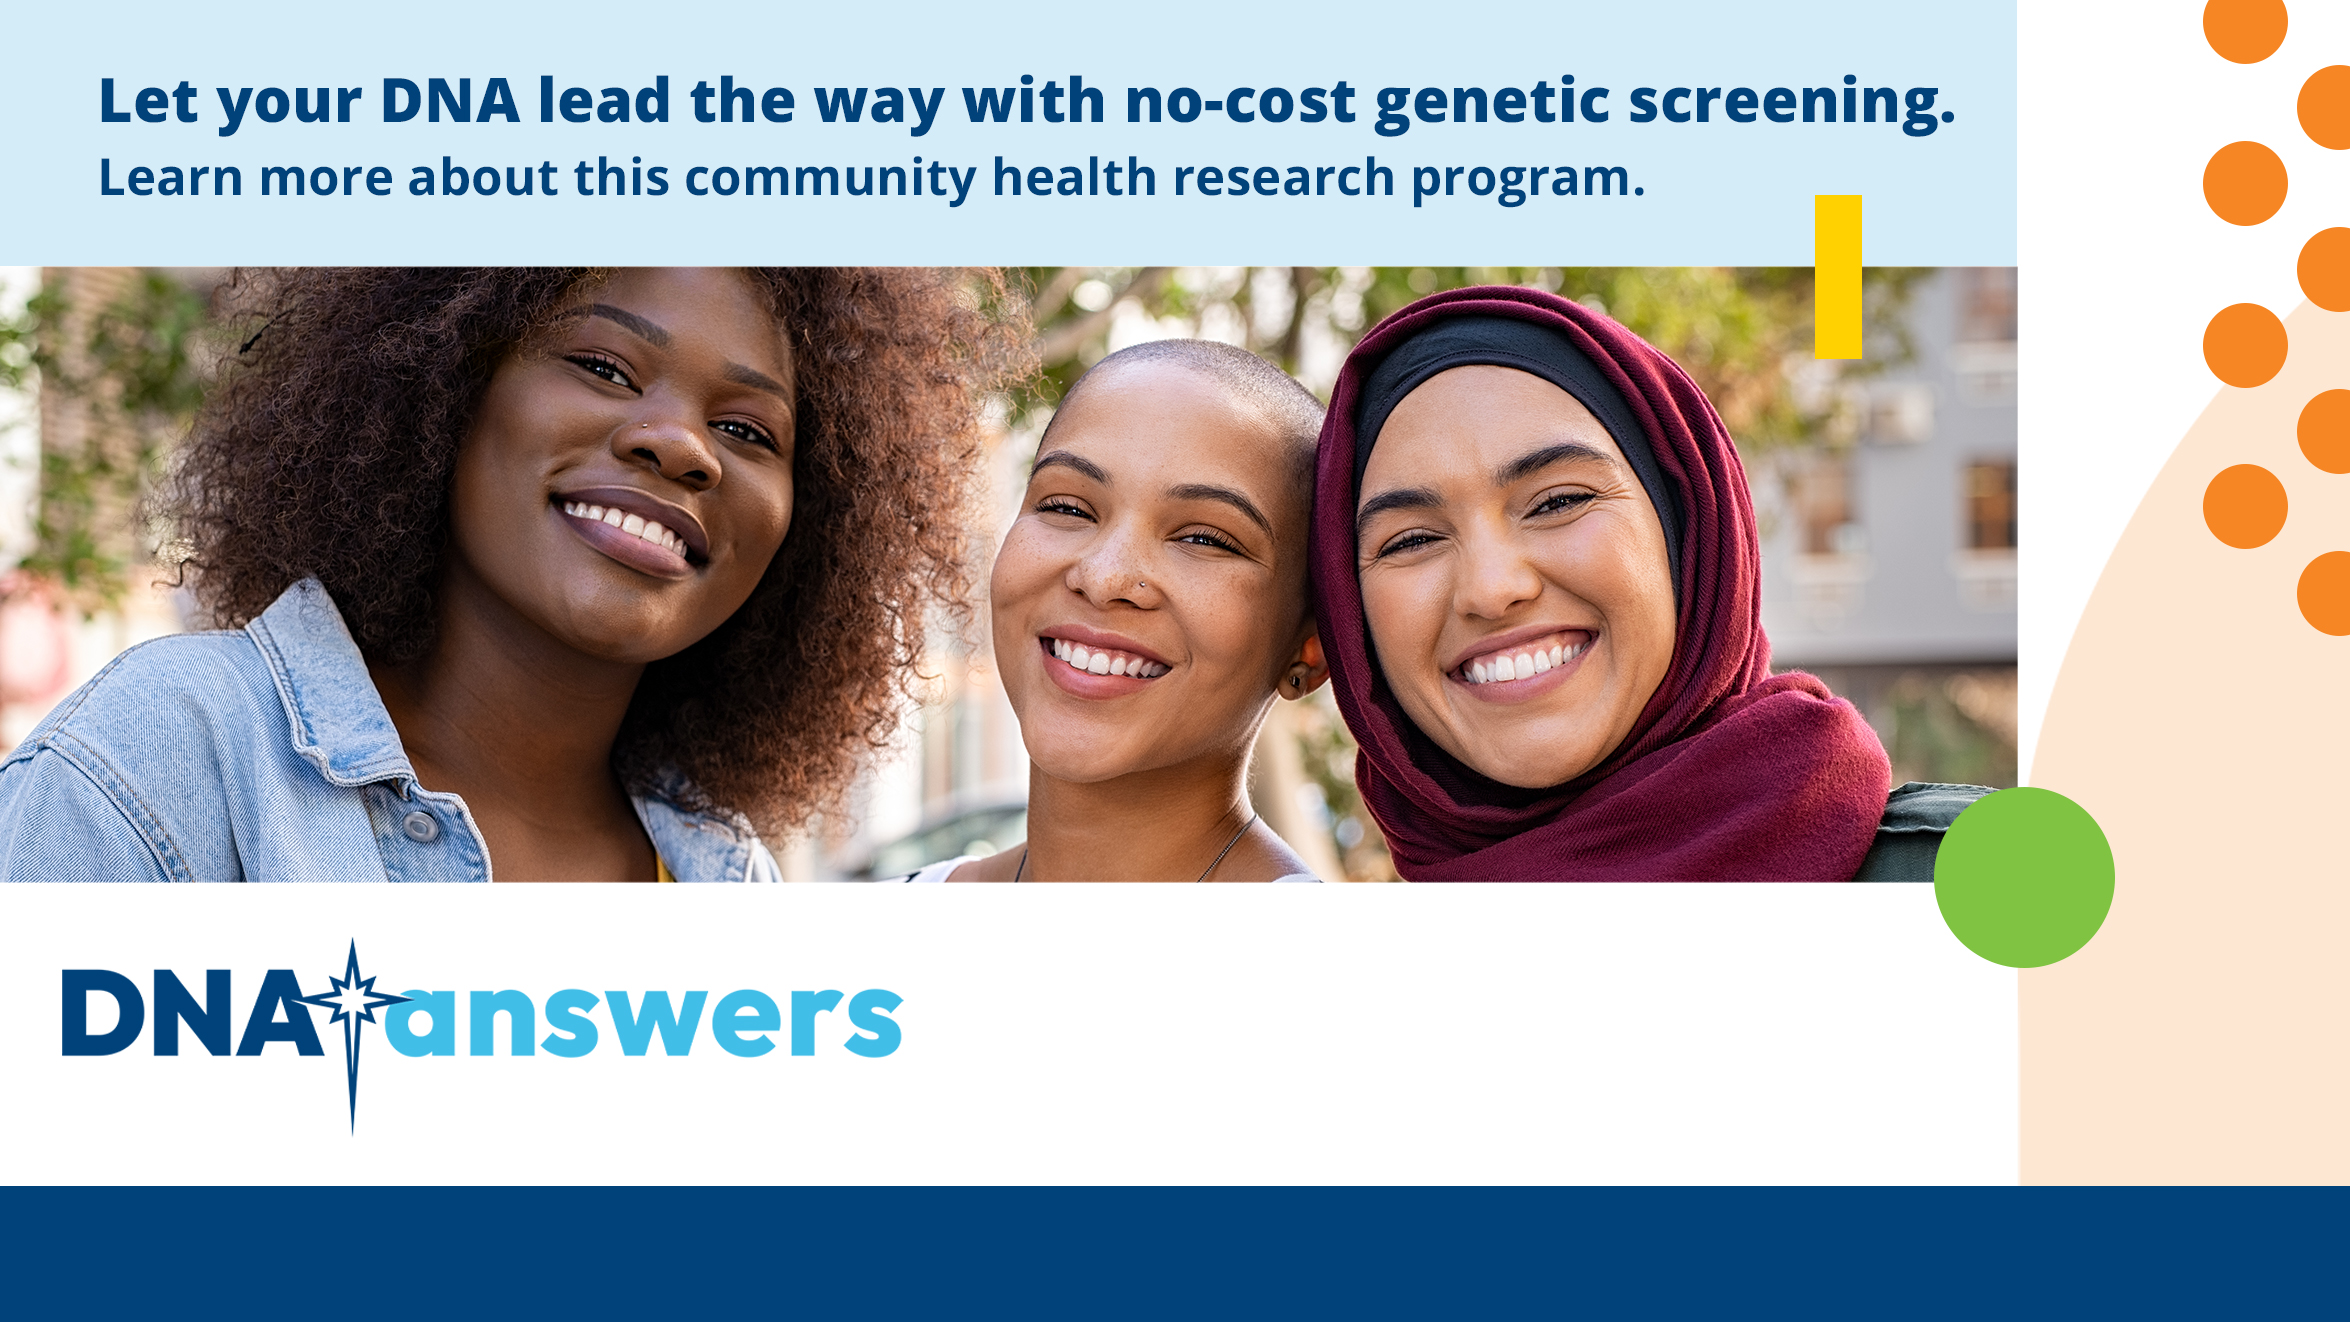 Let your DNA lead the way with no-cost genetic screening.